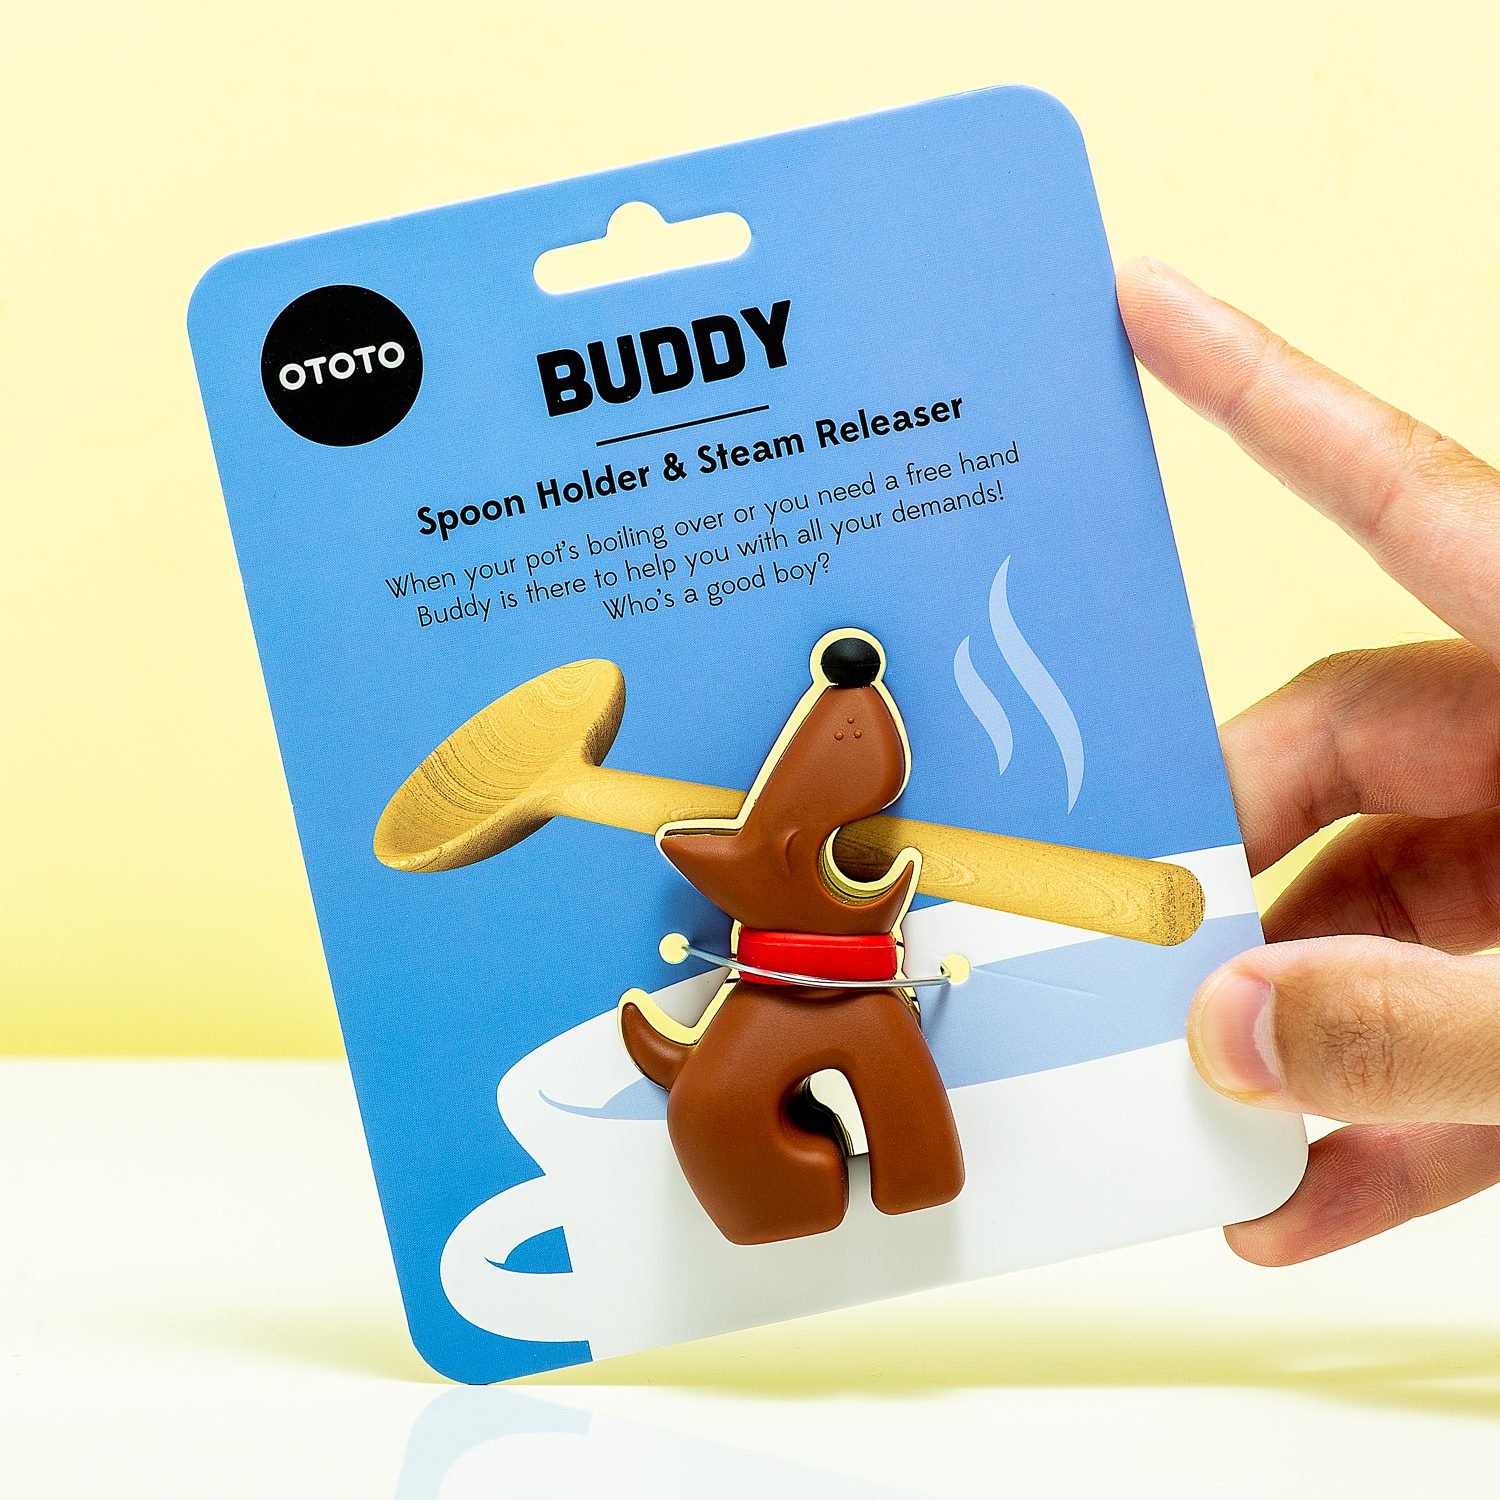 BUDDY SPOON HOLDER AND STEAM RELEASER –